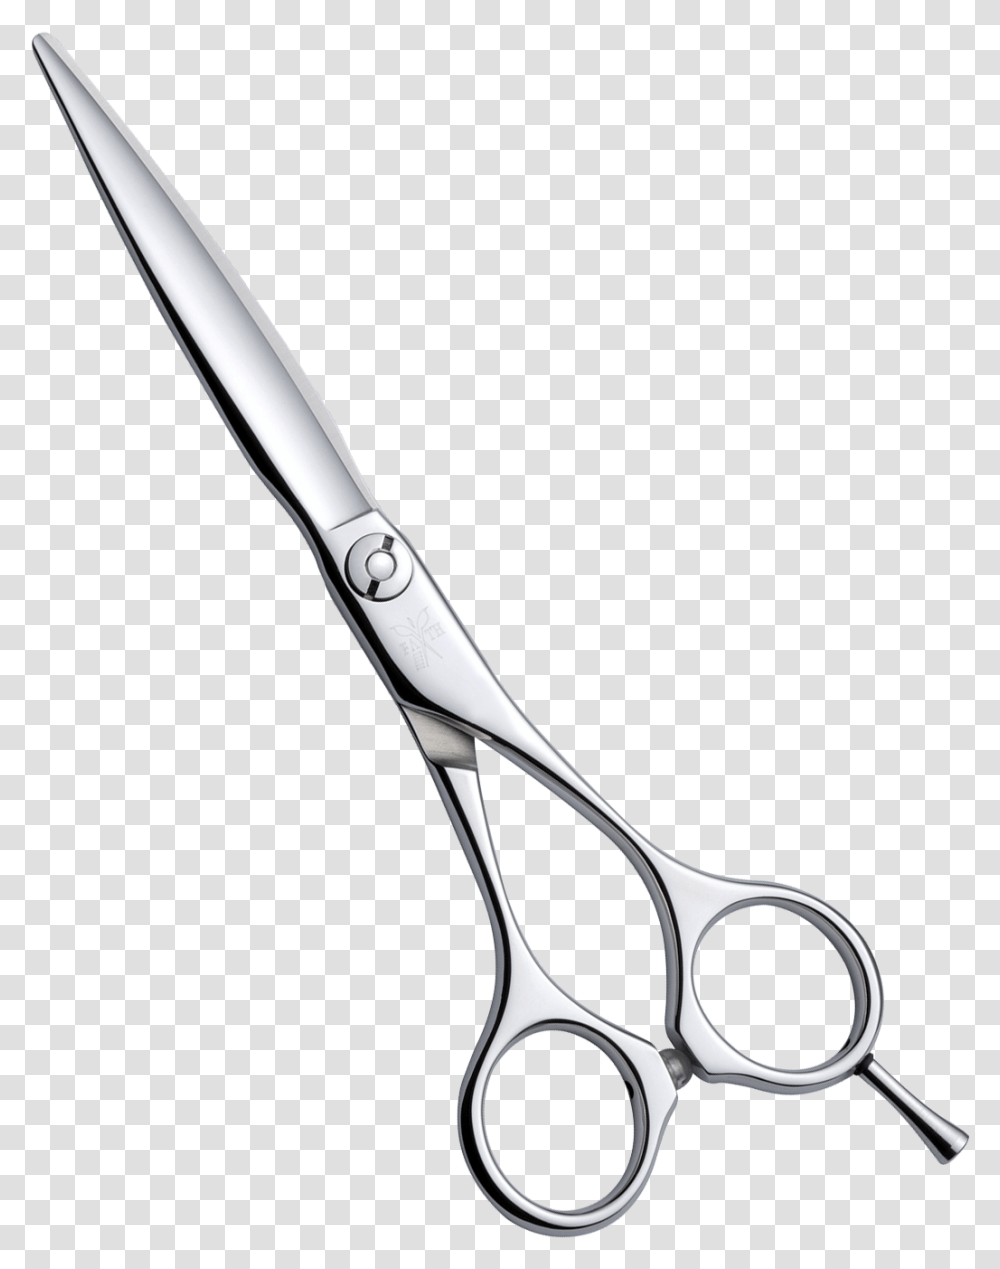 Shears Drawing Shear Clipart Hair Scissors, Weapon, Weaponry, Blade Transparent Png